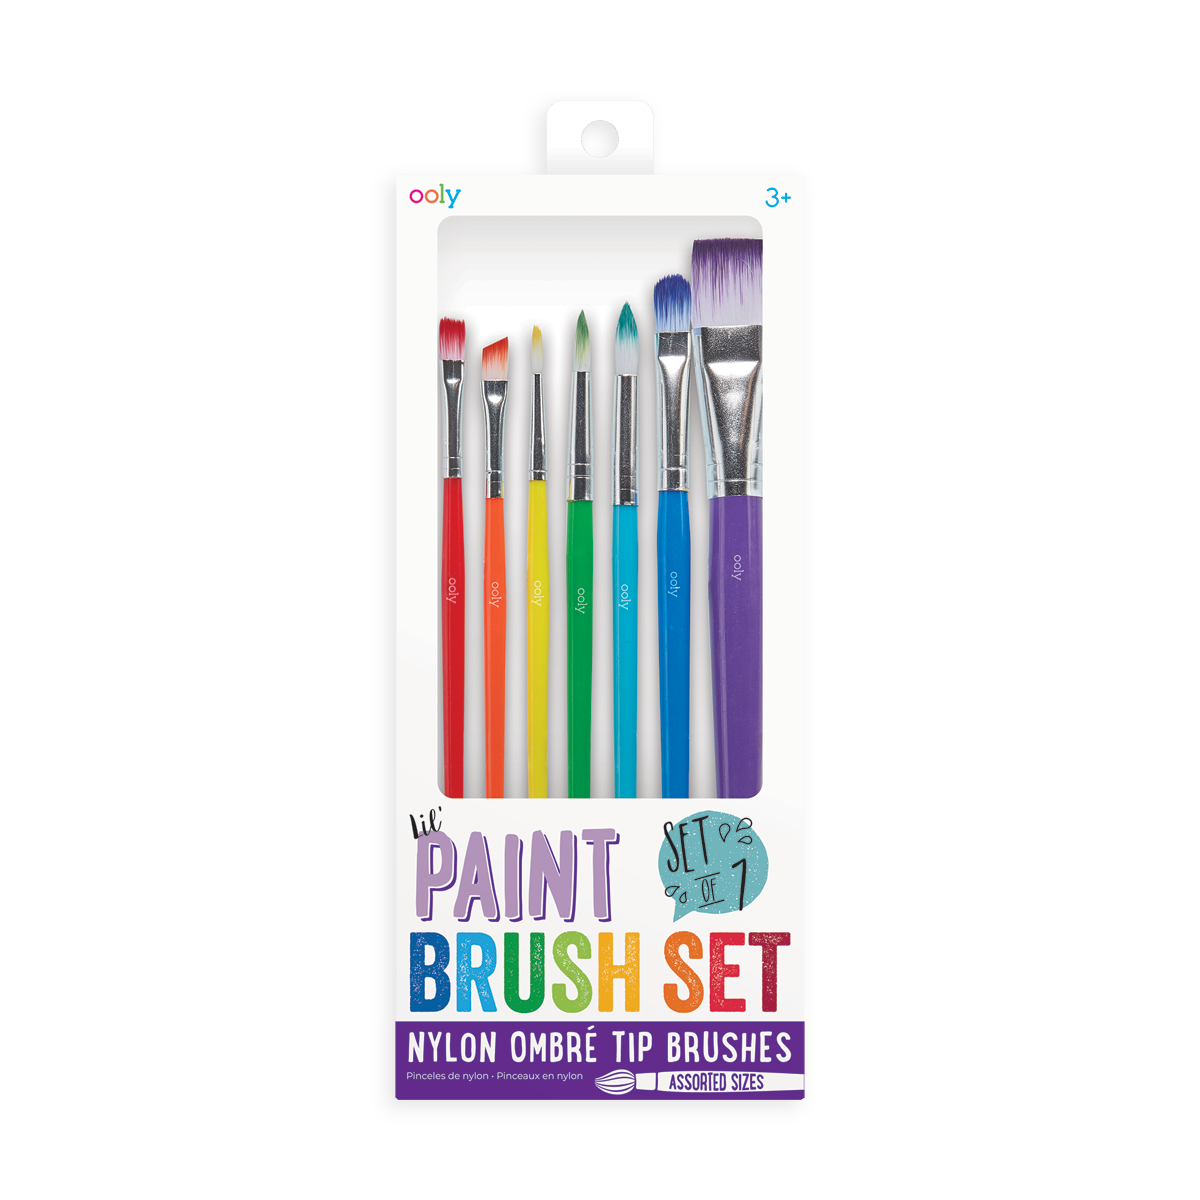 paint brushes and paint png